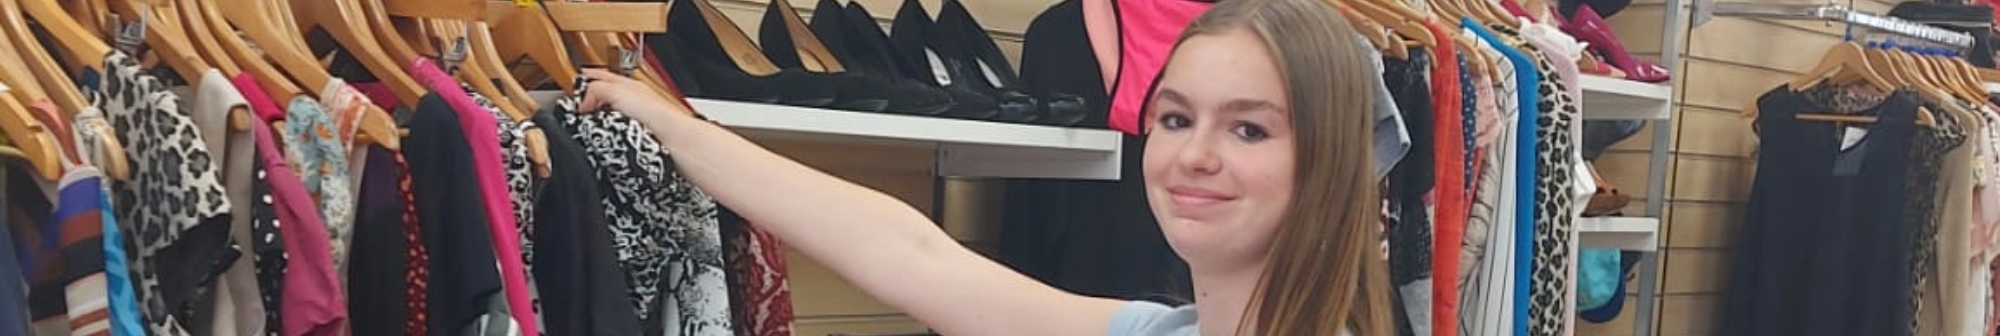 abbie-smiles-at-the-camera-as-she-arranges-clothes-on-rail